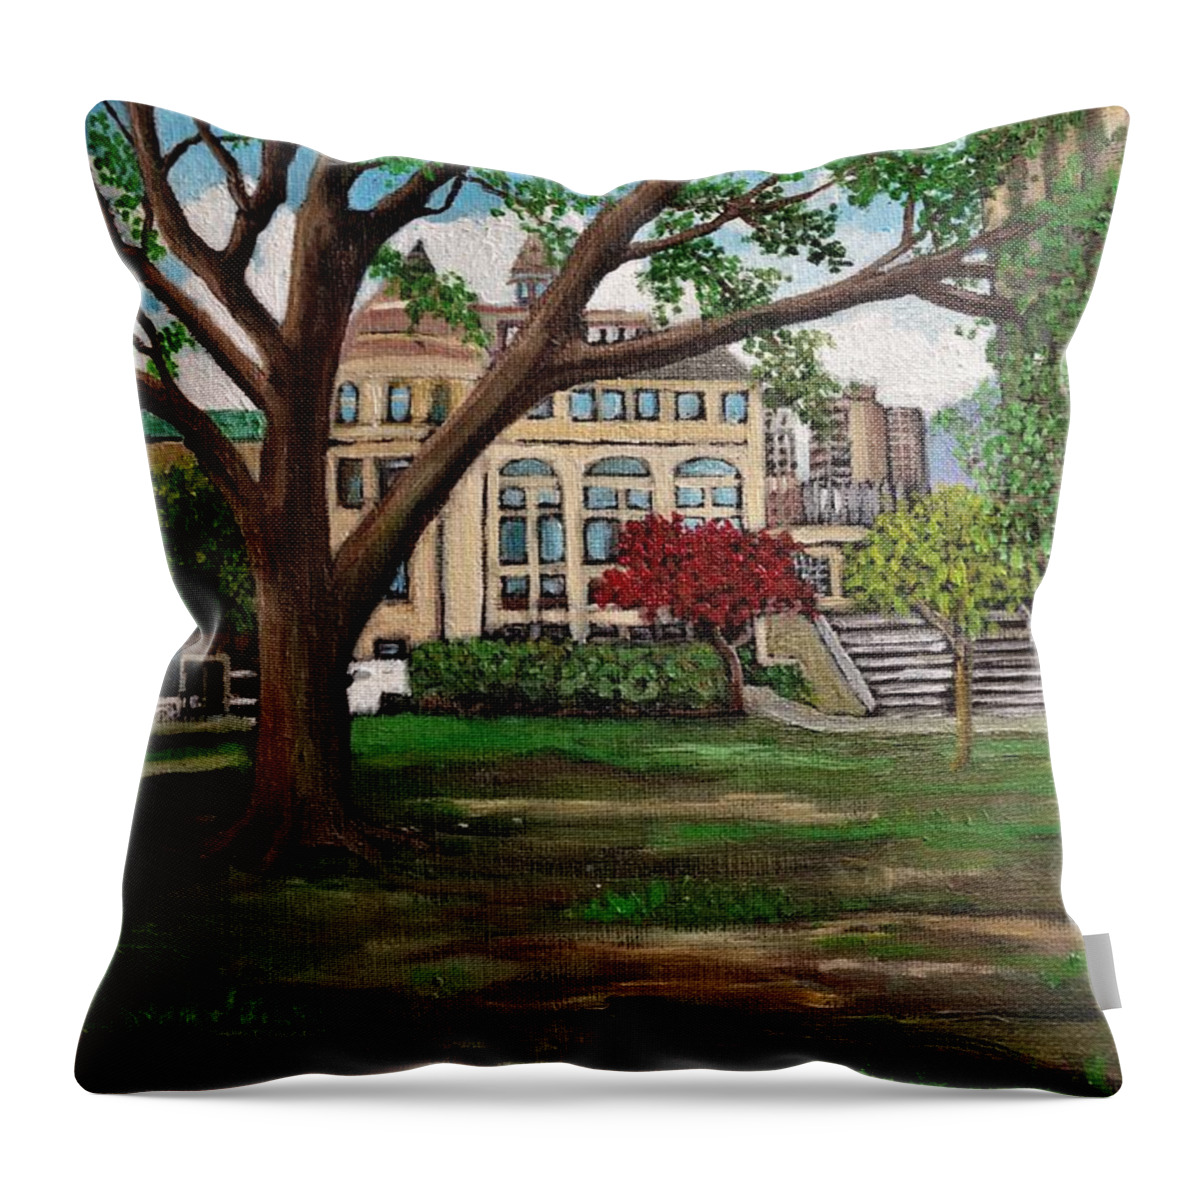 Tree Scenes Throw Pillow featuring the painting Walking McGill Campus by Reb Frost